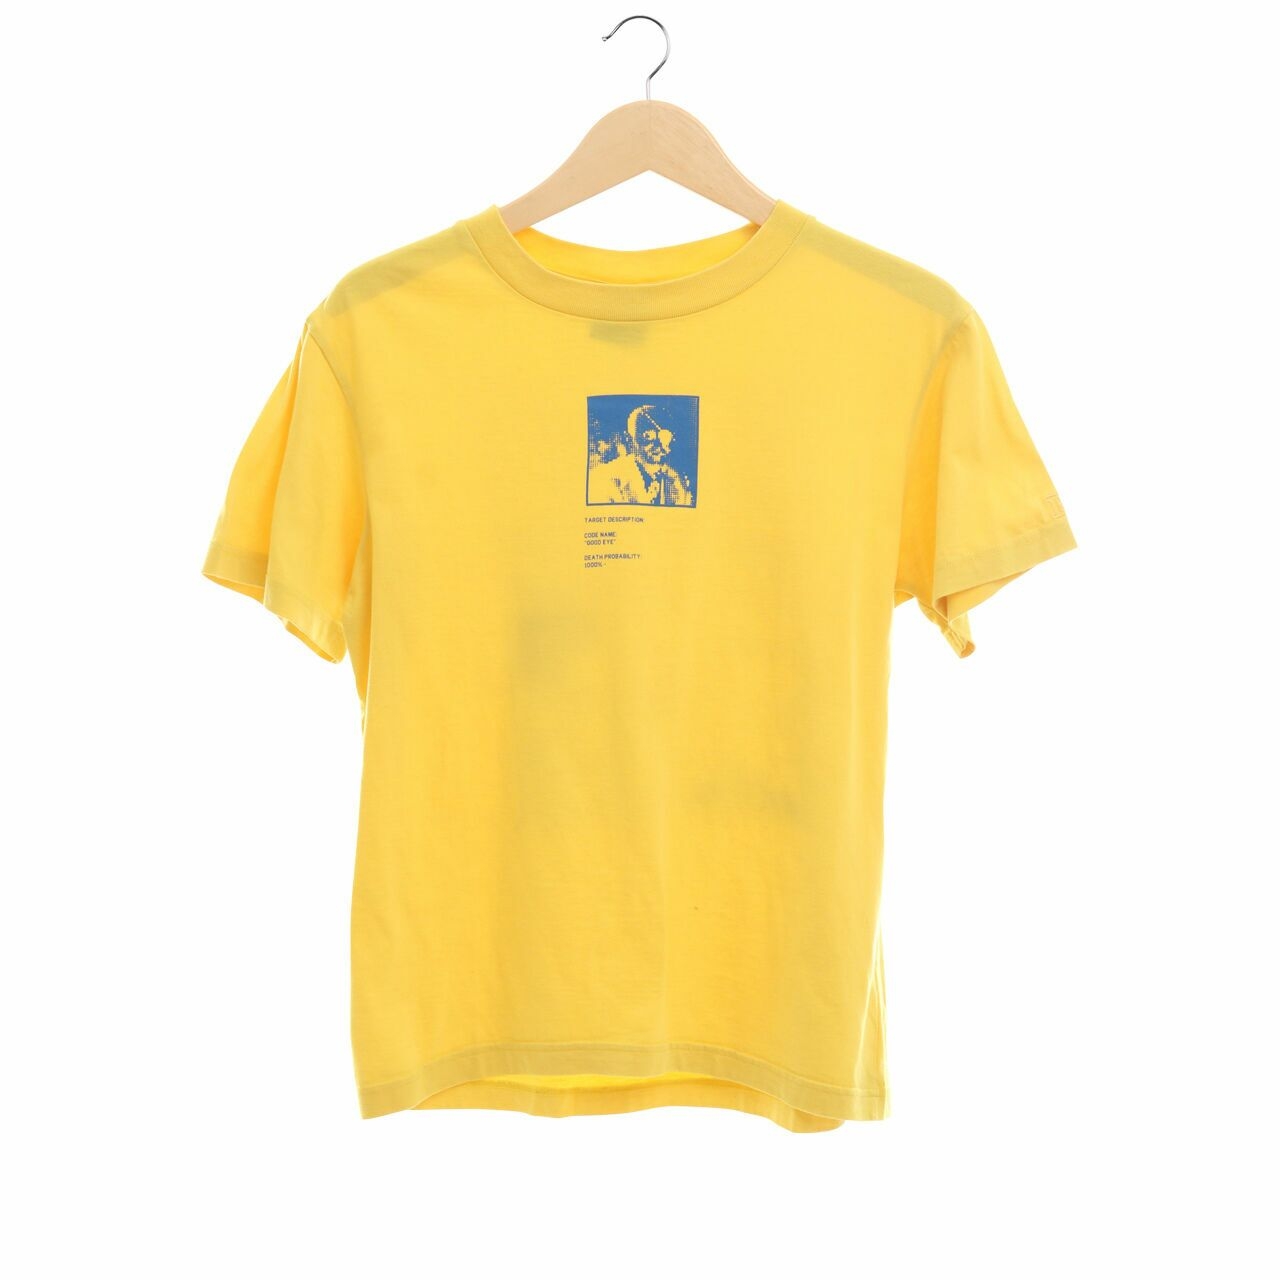 Public Culture Yellow Printed T-Shirt